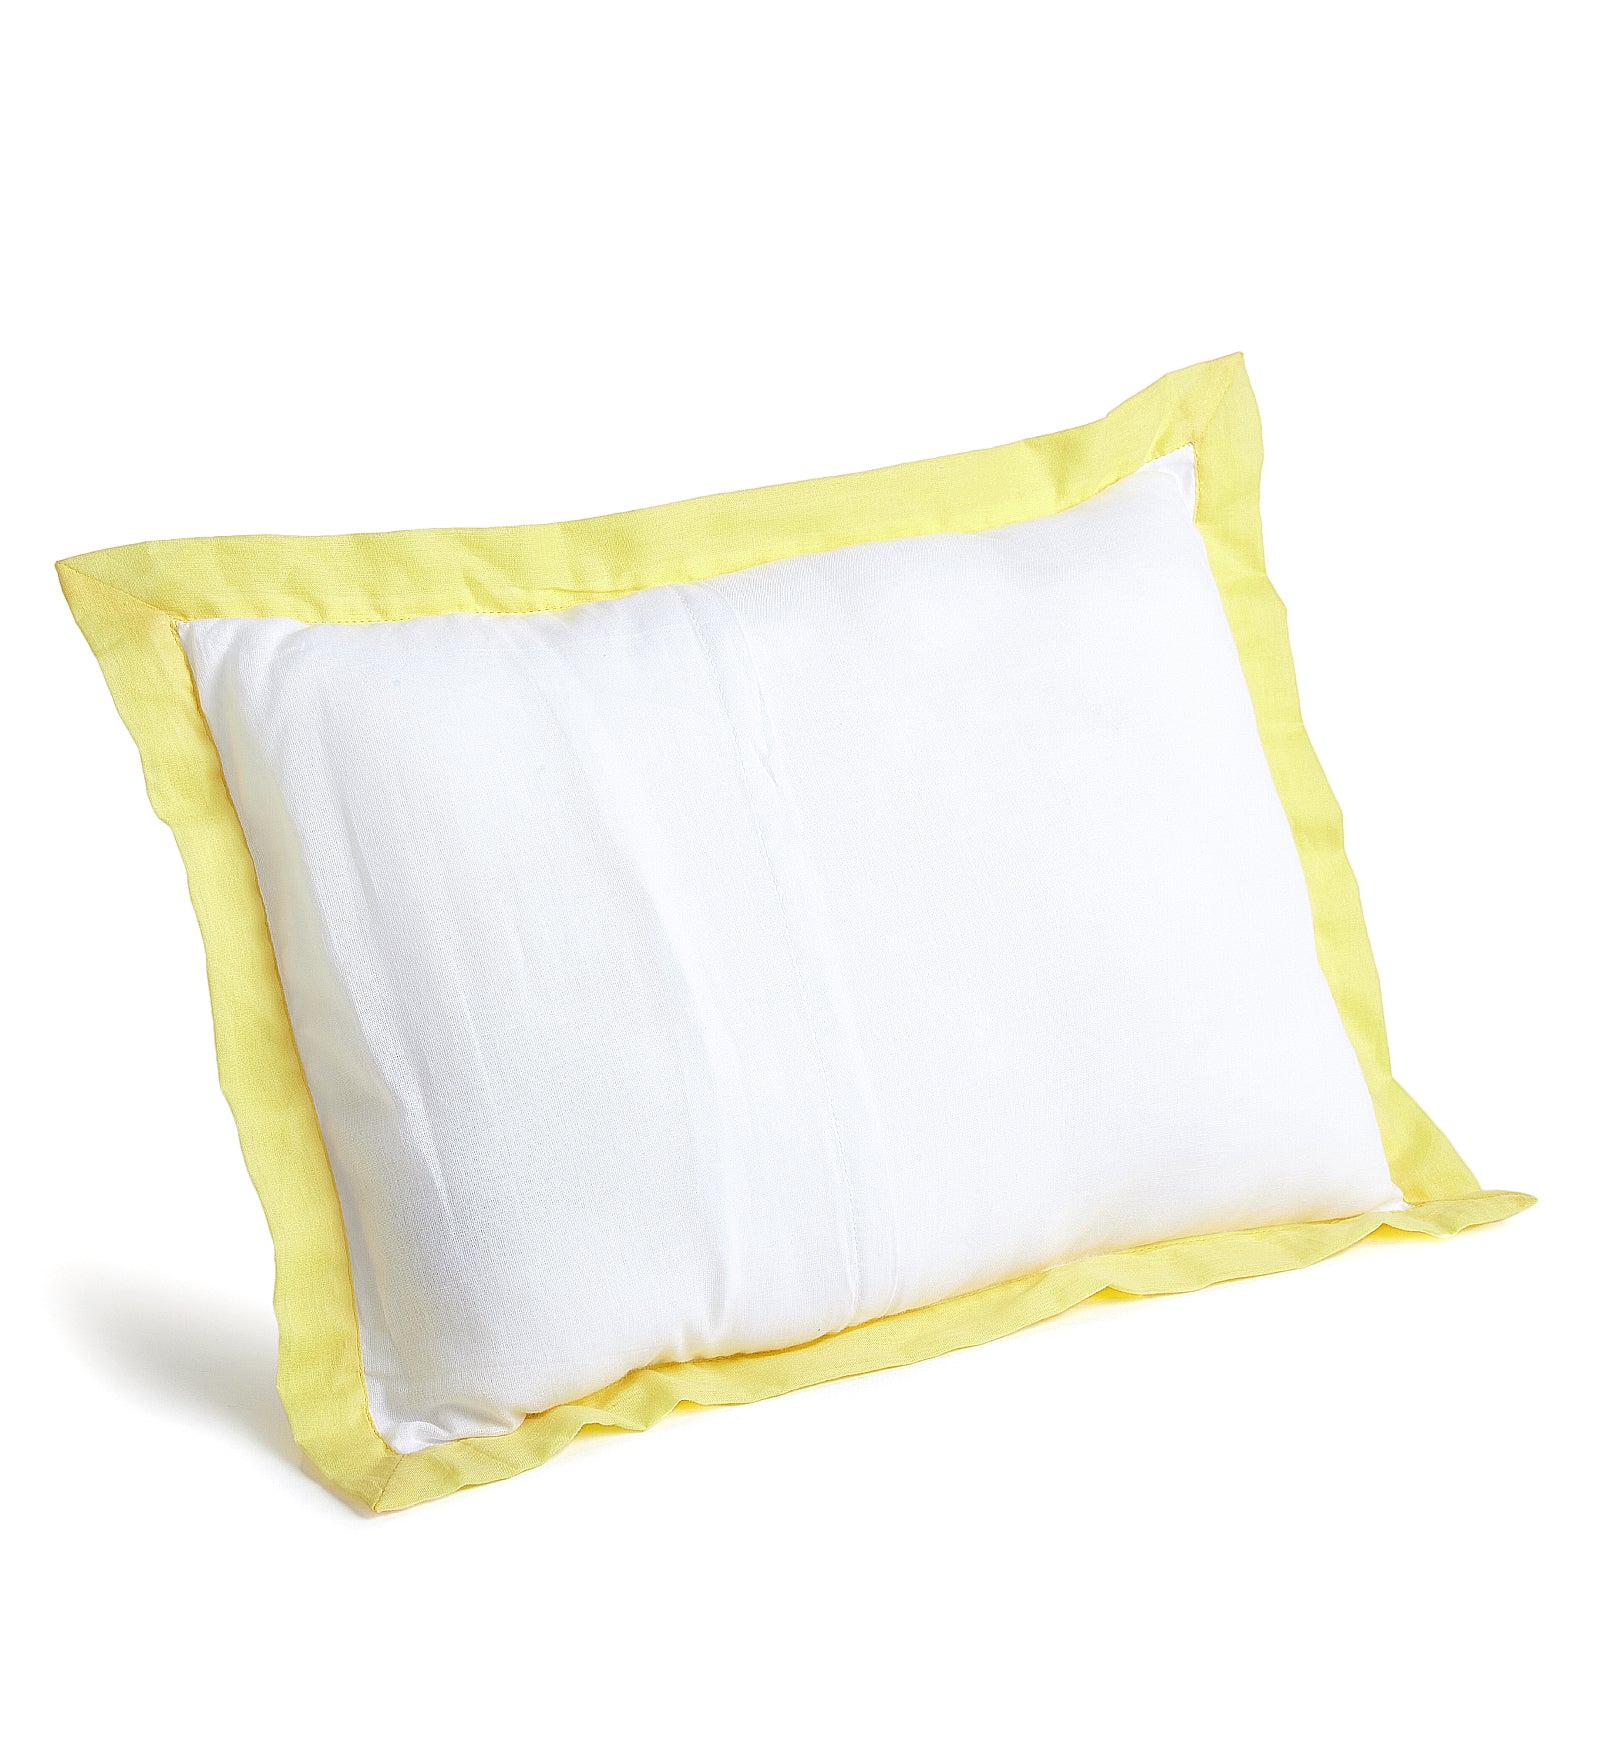 The White Cradle Cot Pillow + 2 Bolsters Set with Fillers - Organic Cotton Fabric, Protective Comfort, Softest Fiber Filling  - Yellow Panda